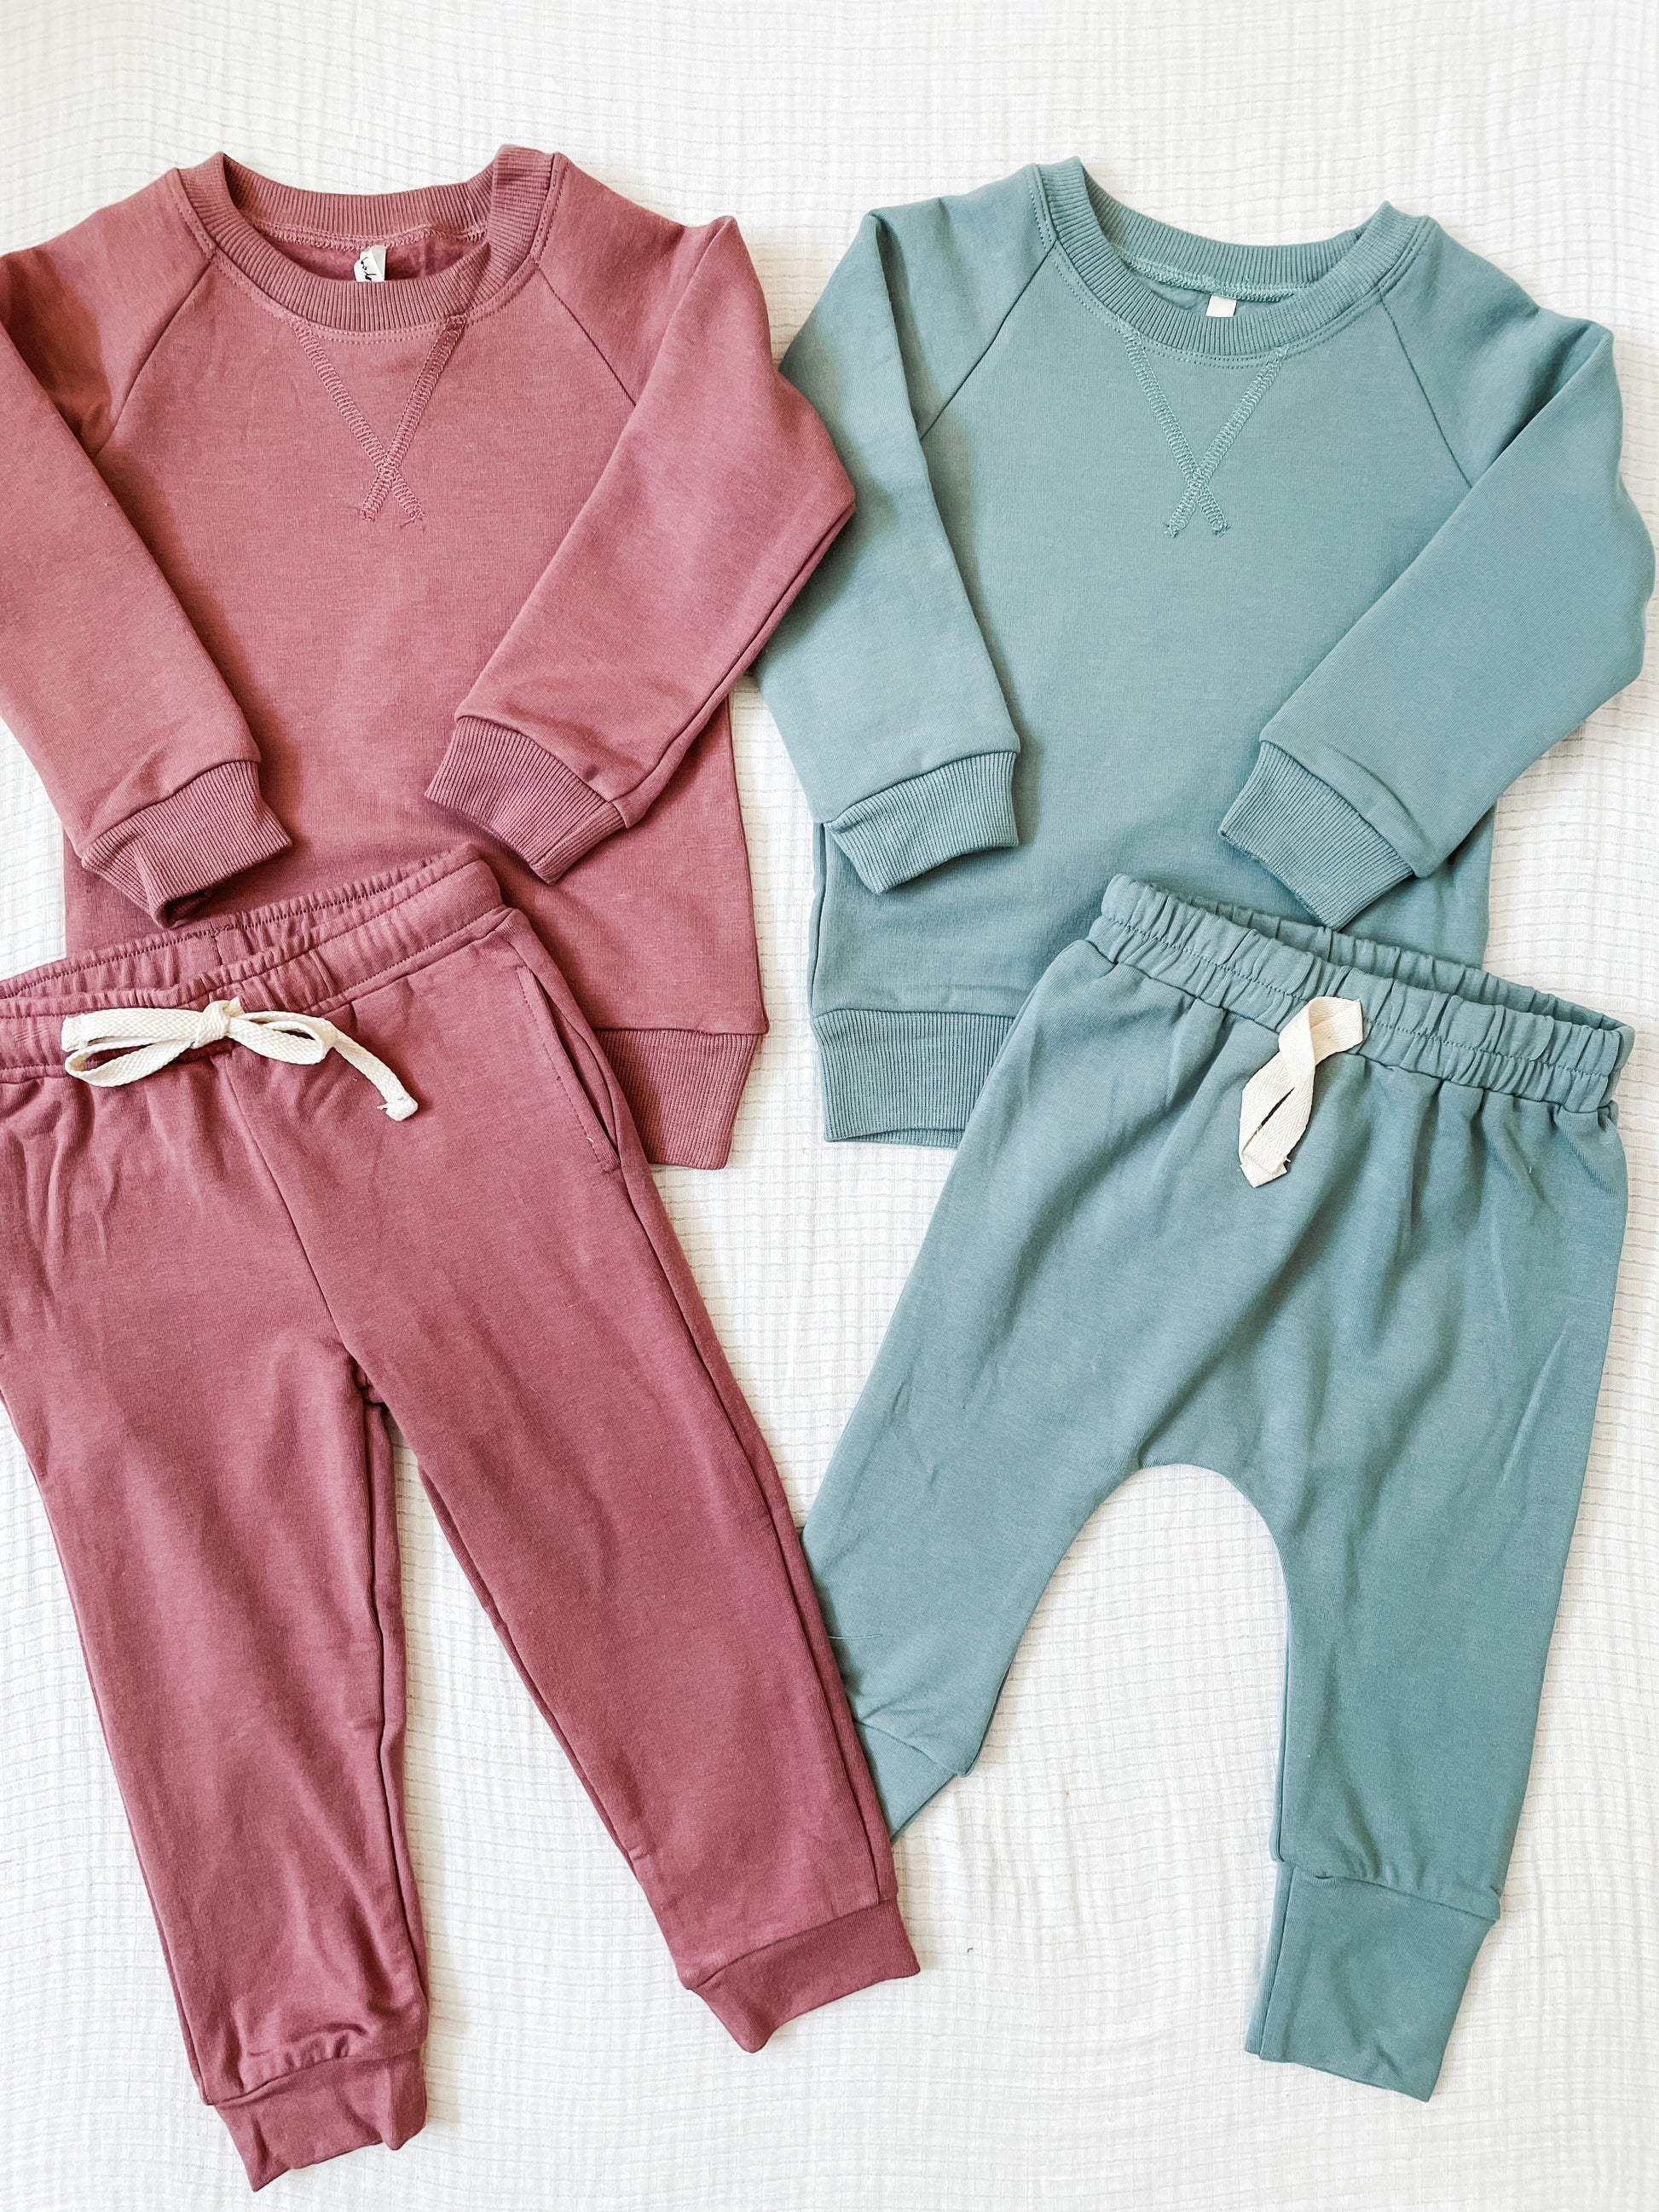 covelAsher Slim Harems - Stone Blue - Premium pants from babysprouts clothing company - Just $25! Shop now at covel12-24, baby, baby bottom, boys, Faire, girls, kid bottom, Toddlercovel